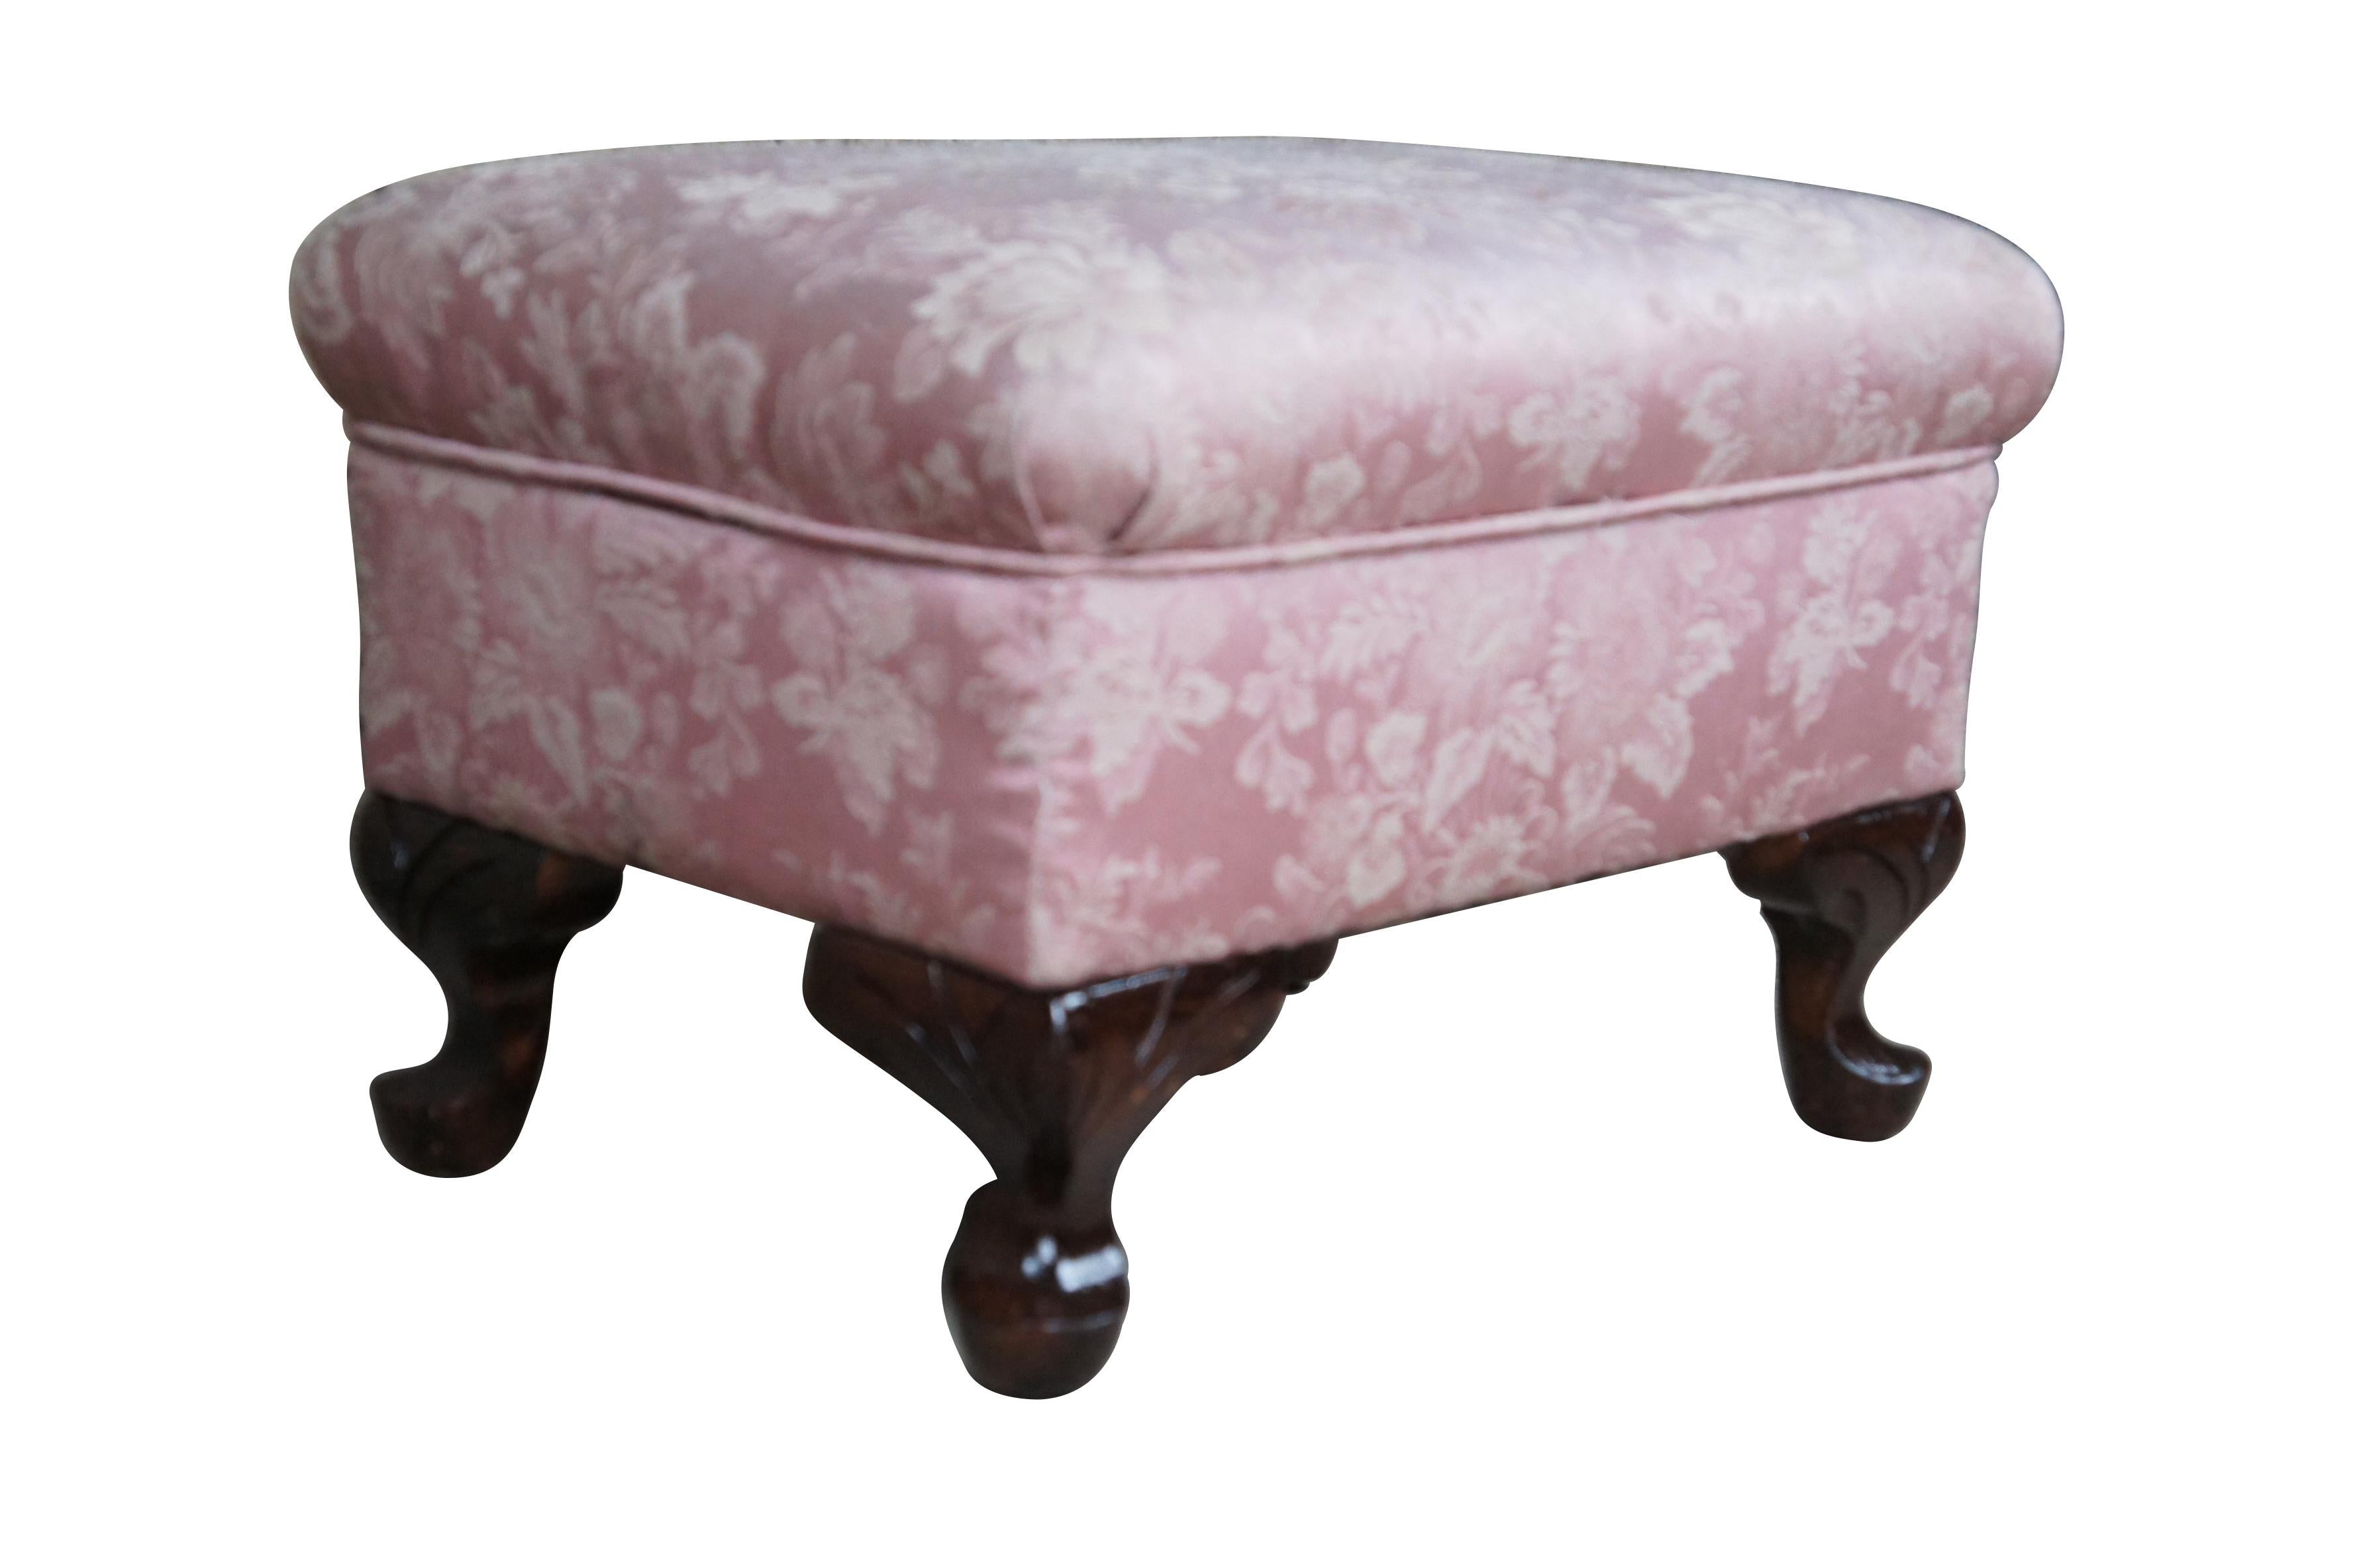 Mid 20th Century footstool with floral upholstered seat.  Features a rectangular form with short carved cabriole legs. 

Dimensions:
15